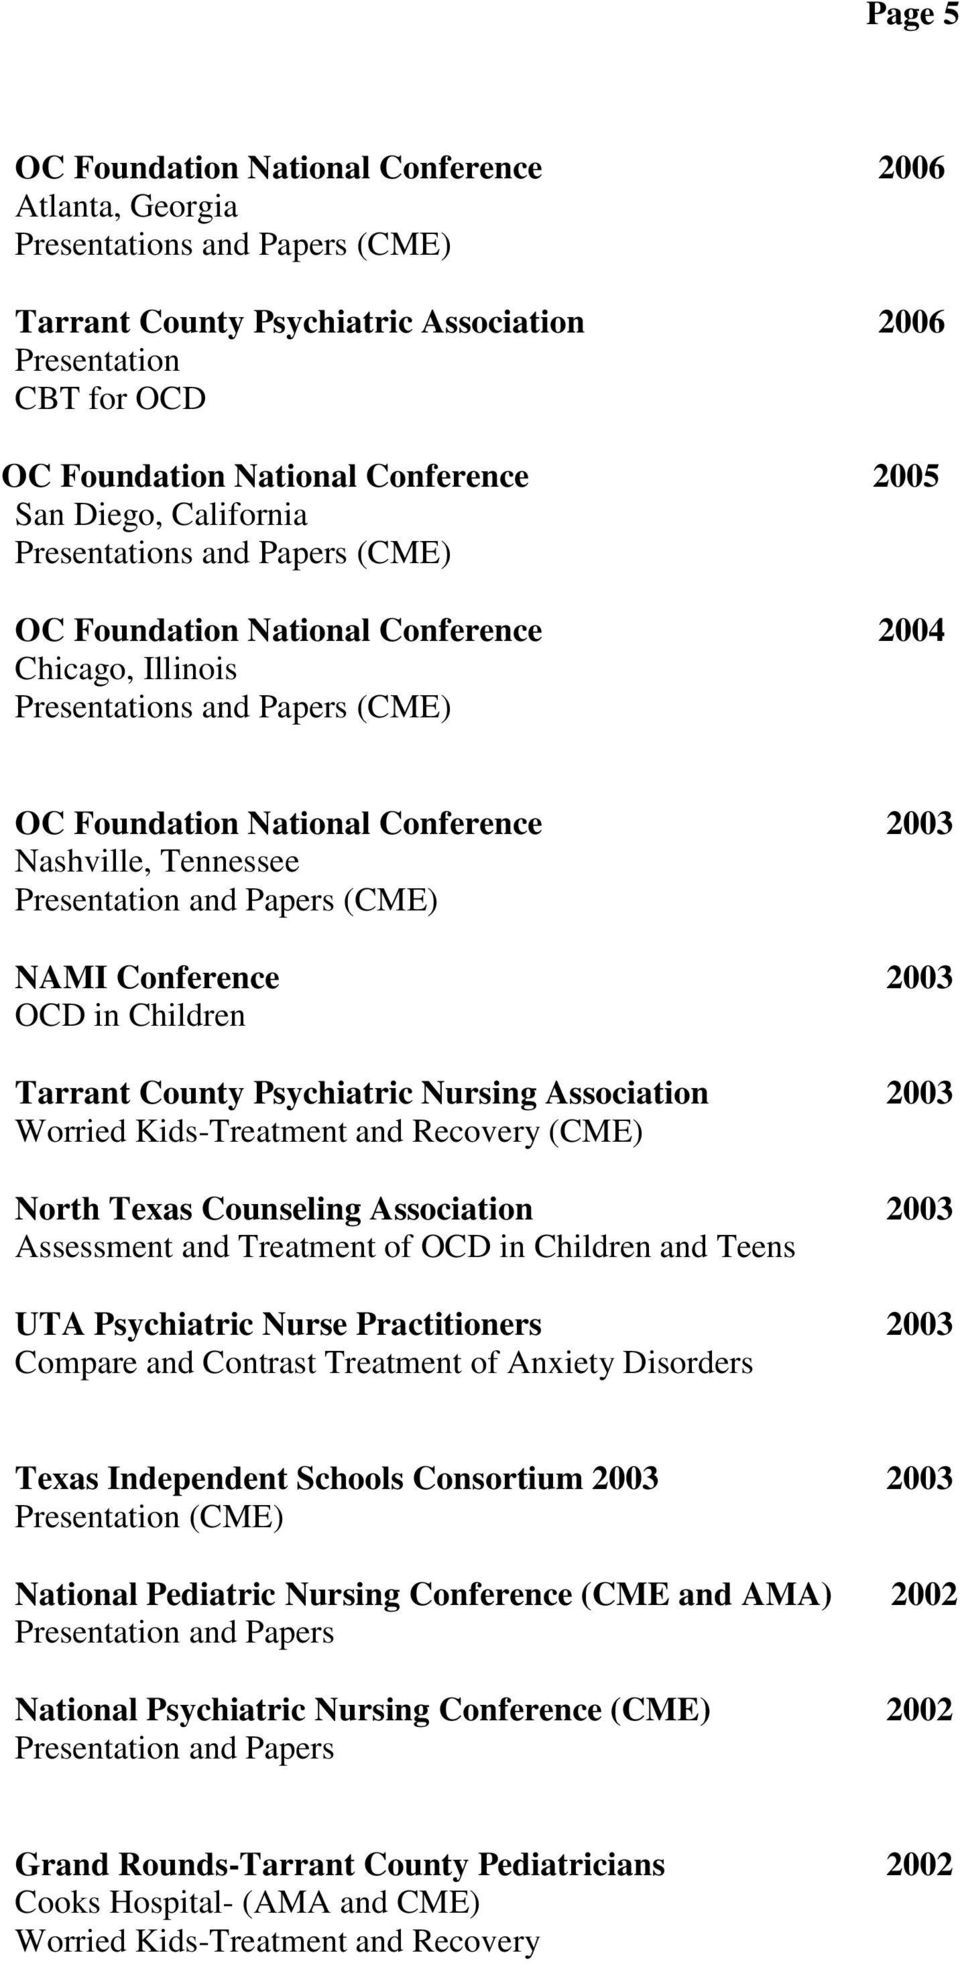 Psychiatric Nursing Association 2003 Worried Kids-Treatment and Recovery (CME) North Texas Counseling Association 2003 Assessment and Treatment of OCD in Children and Teens UTA Psychiatric Nurse